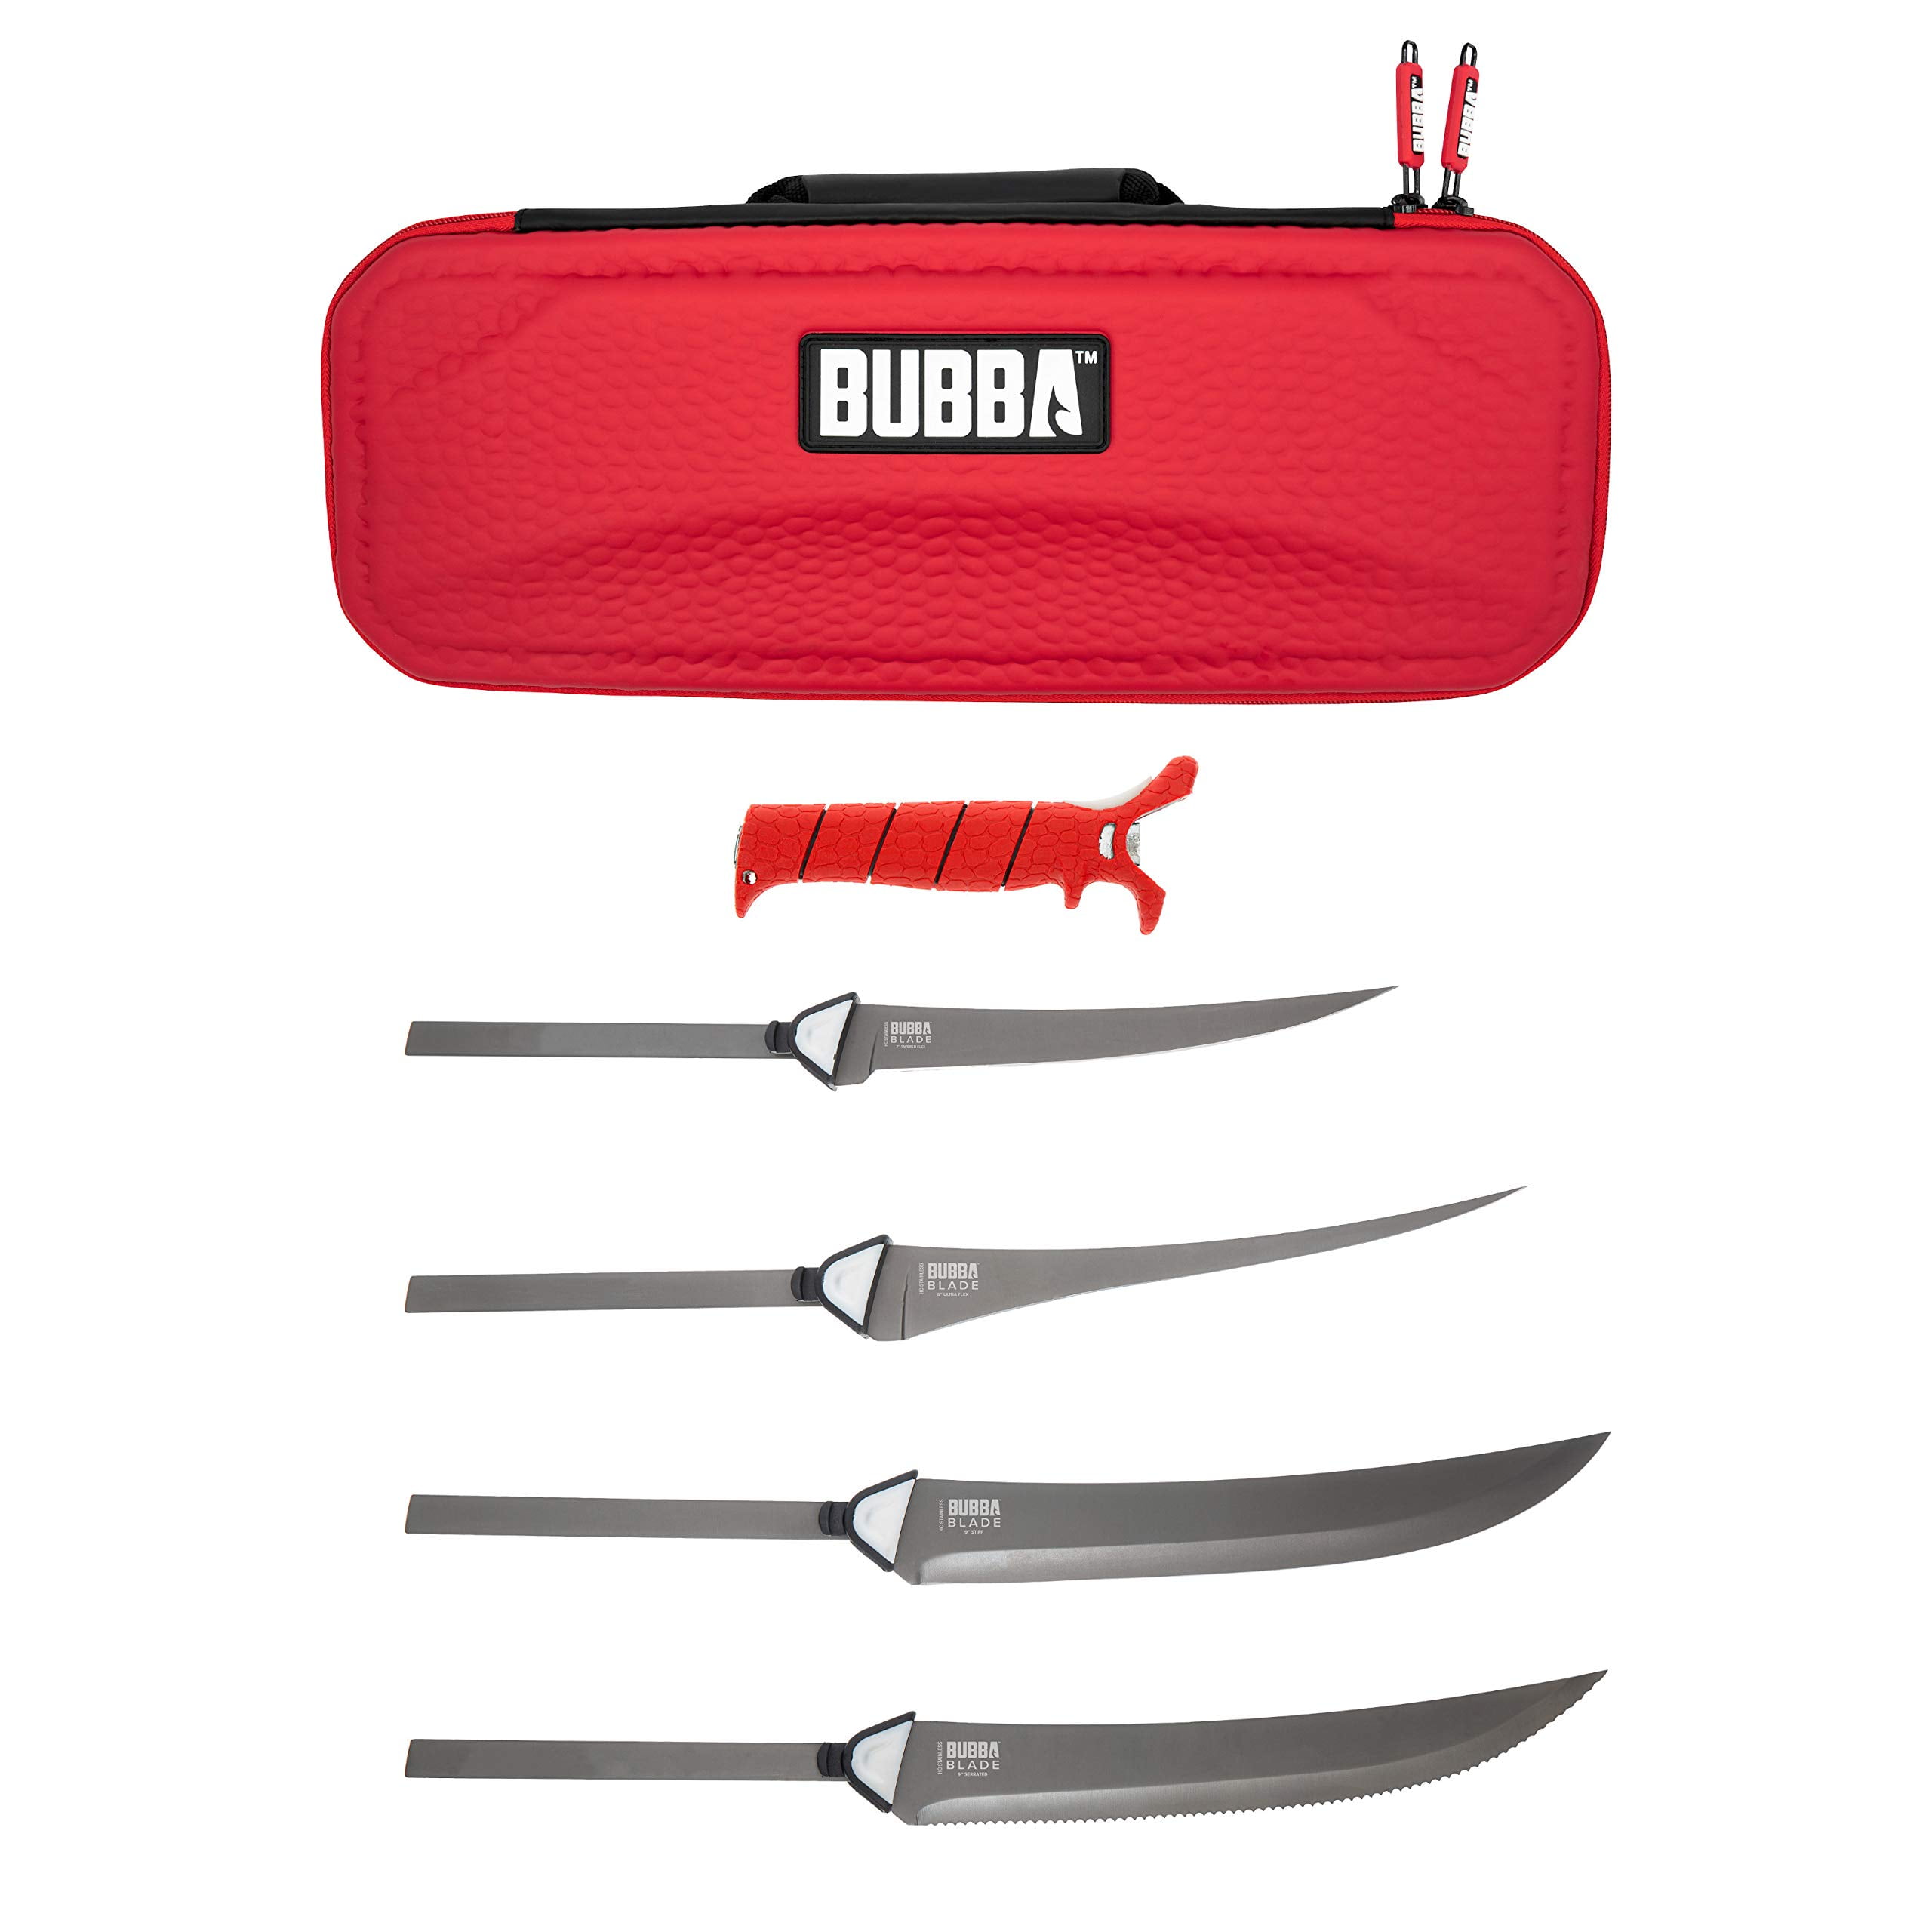 BUBBA Multi-Flex Interchangeable Blade, with Non-Slip Grip Handle, 4  Ti-Nitride S.S. Coated Non-Stick Blades and Case for Fishing 